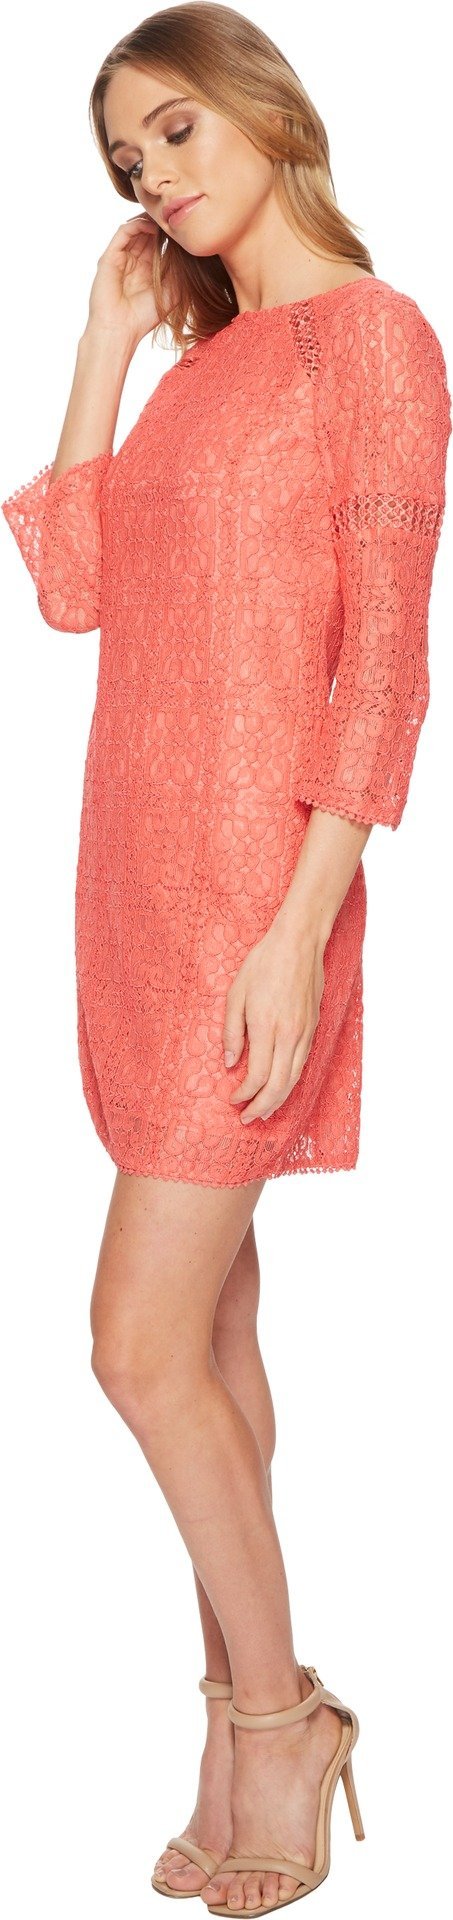 Adrianna Papell - AP1D102465 Quarter Length Sleeve Lace Shift Dress In Orange